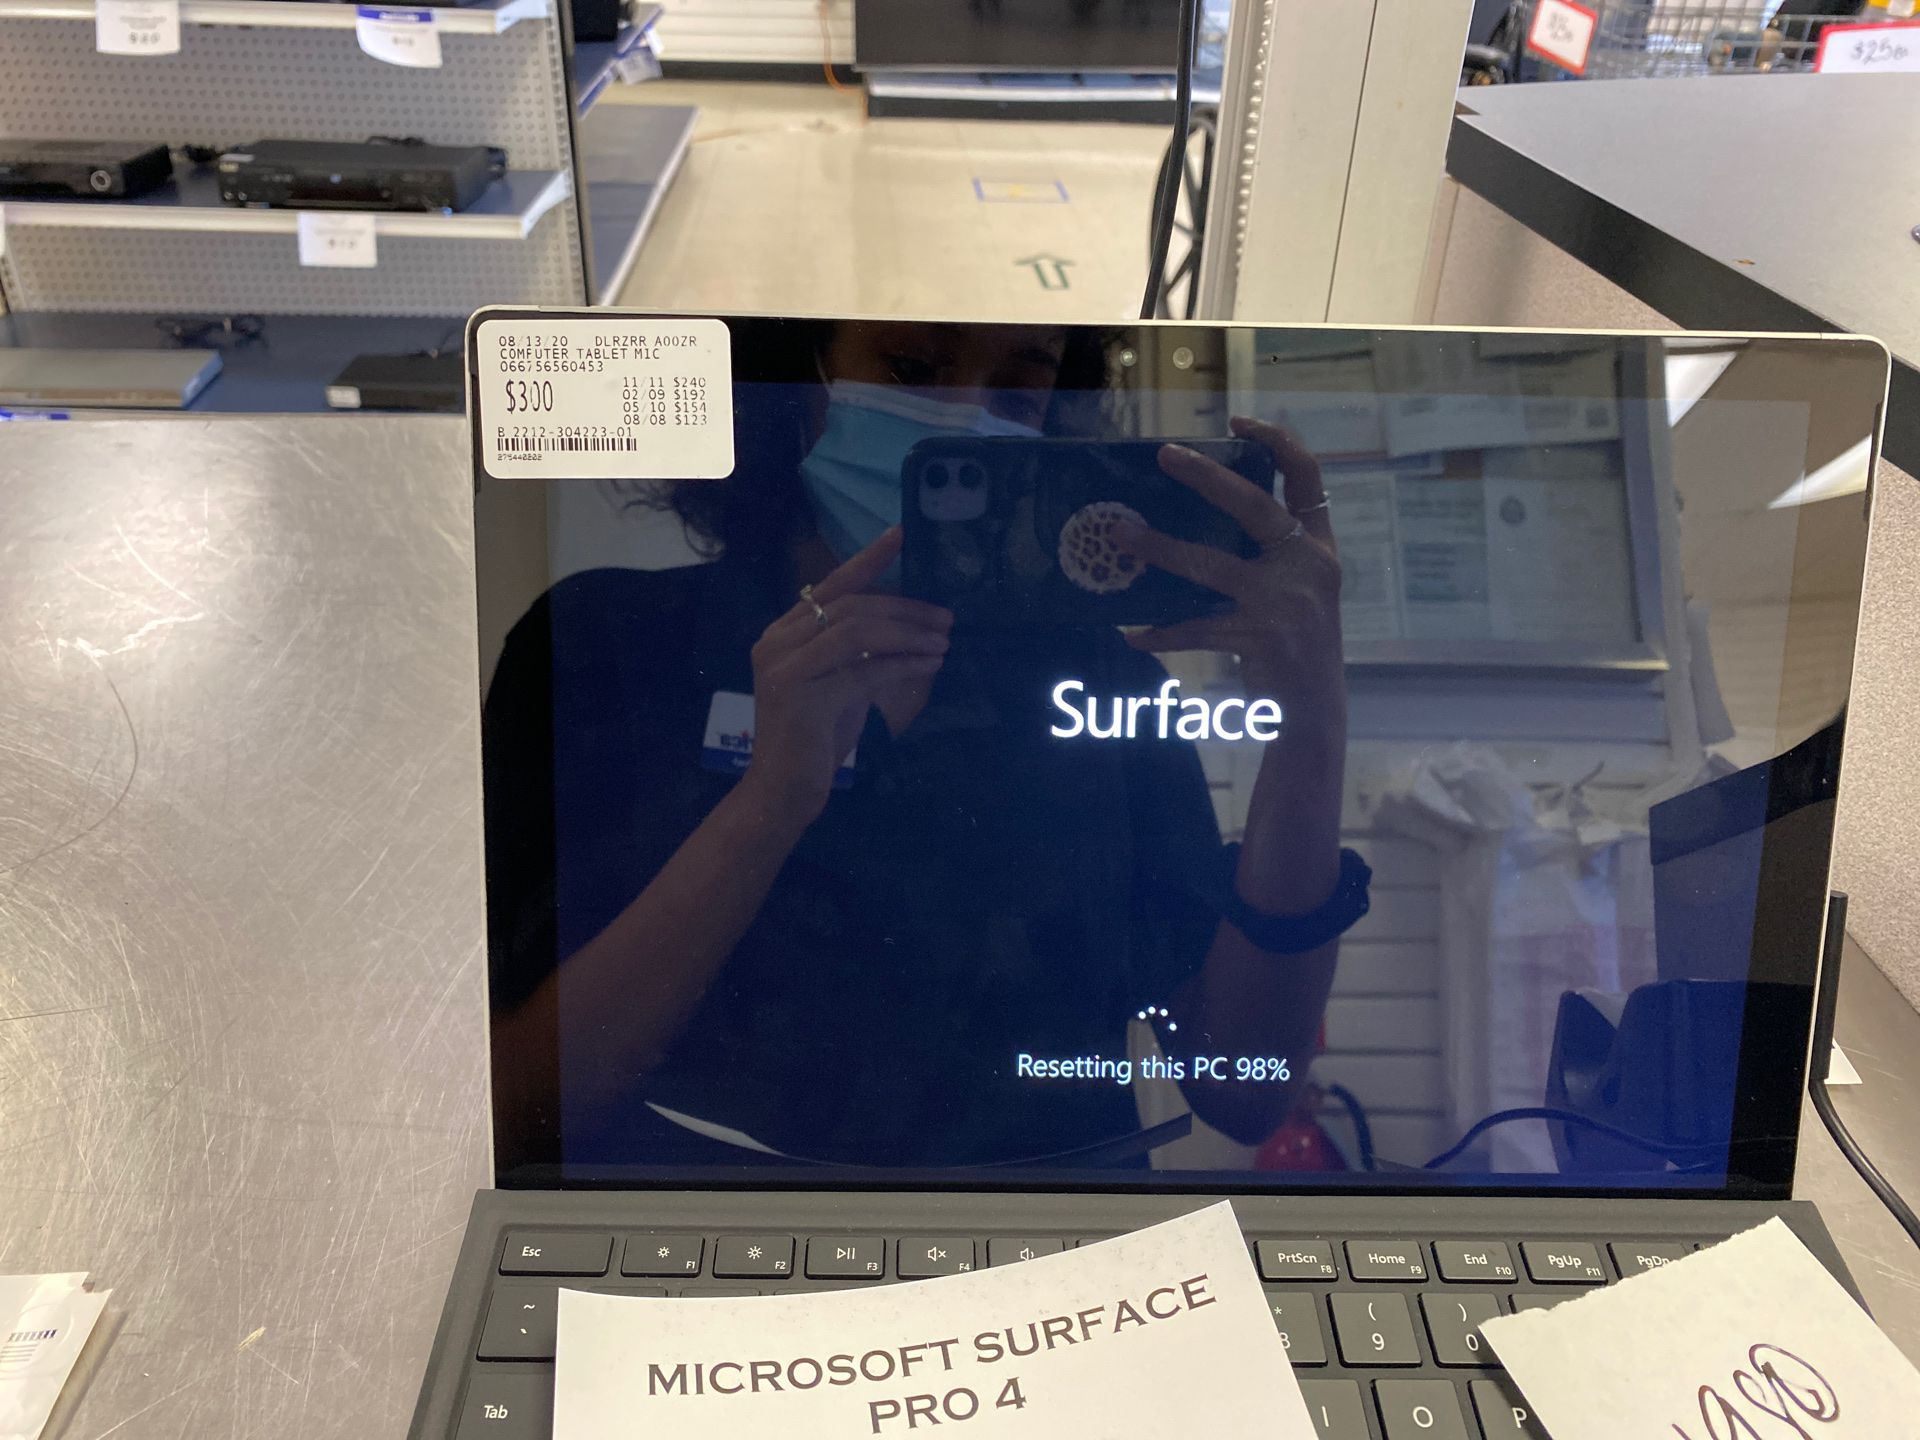 Microsoft tablet surface pro 4